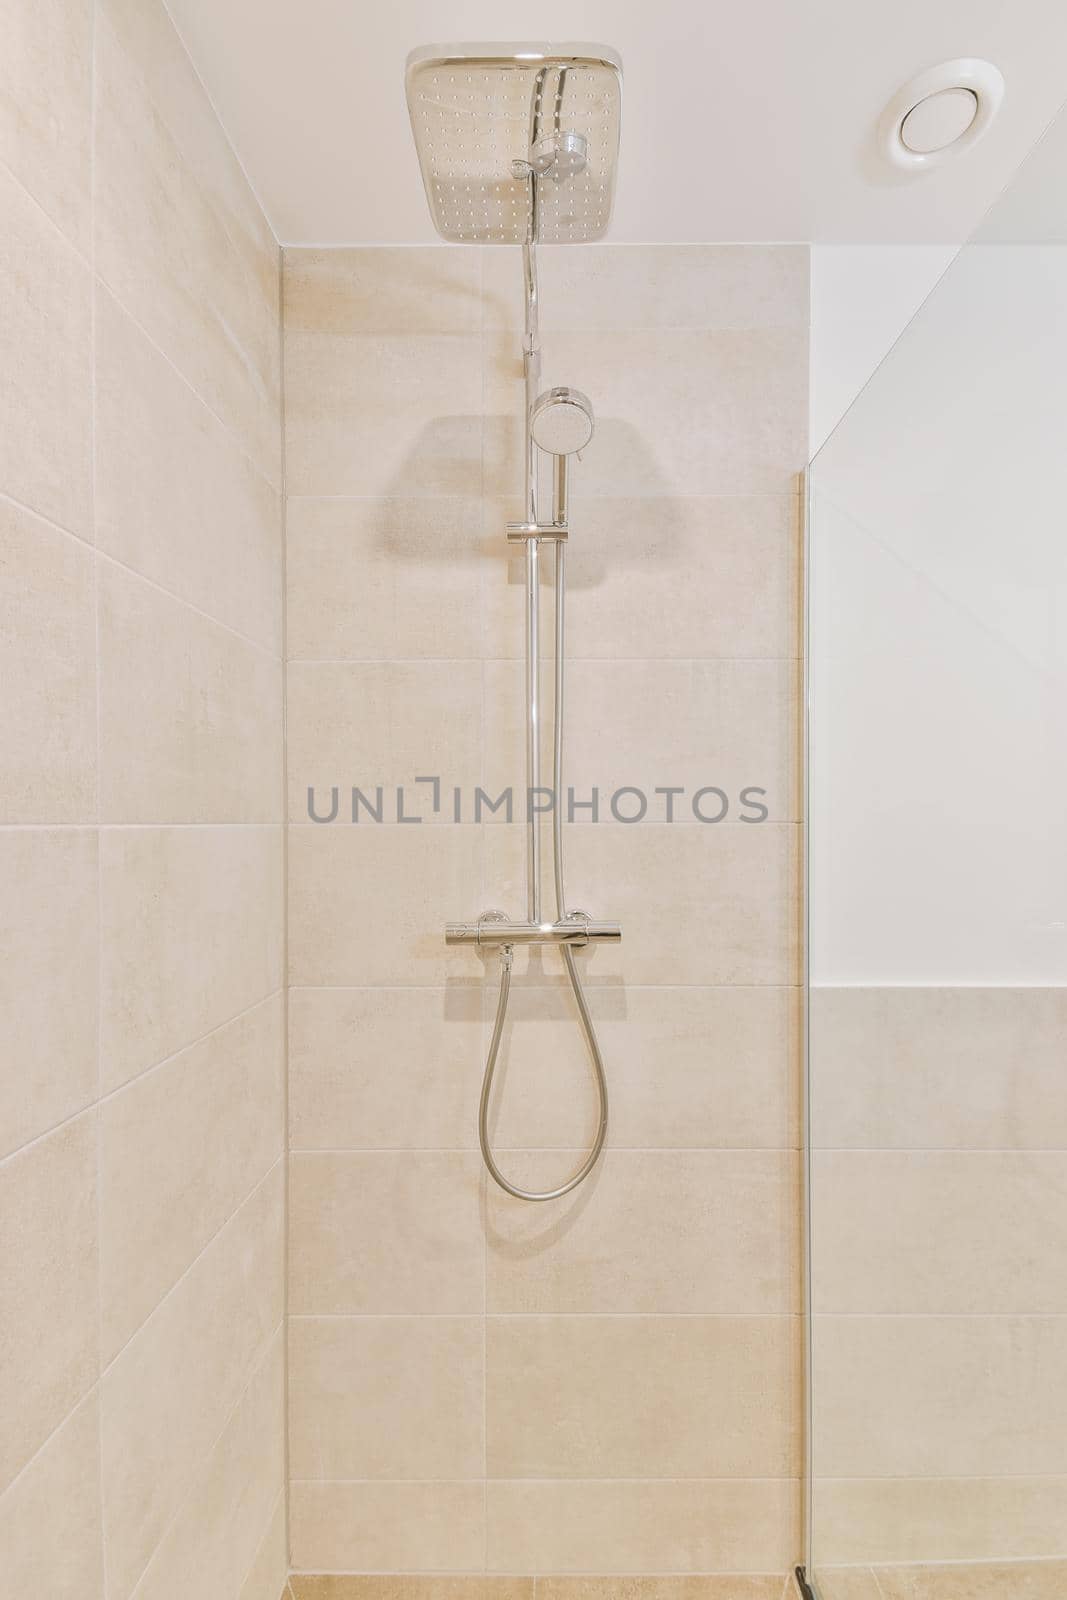 Bathroom interior finished with beige tiles by casamedia